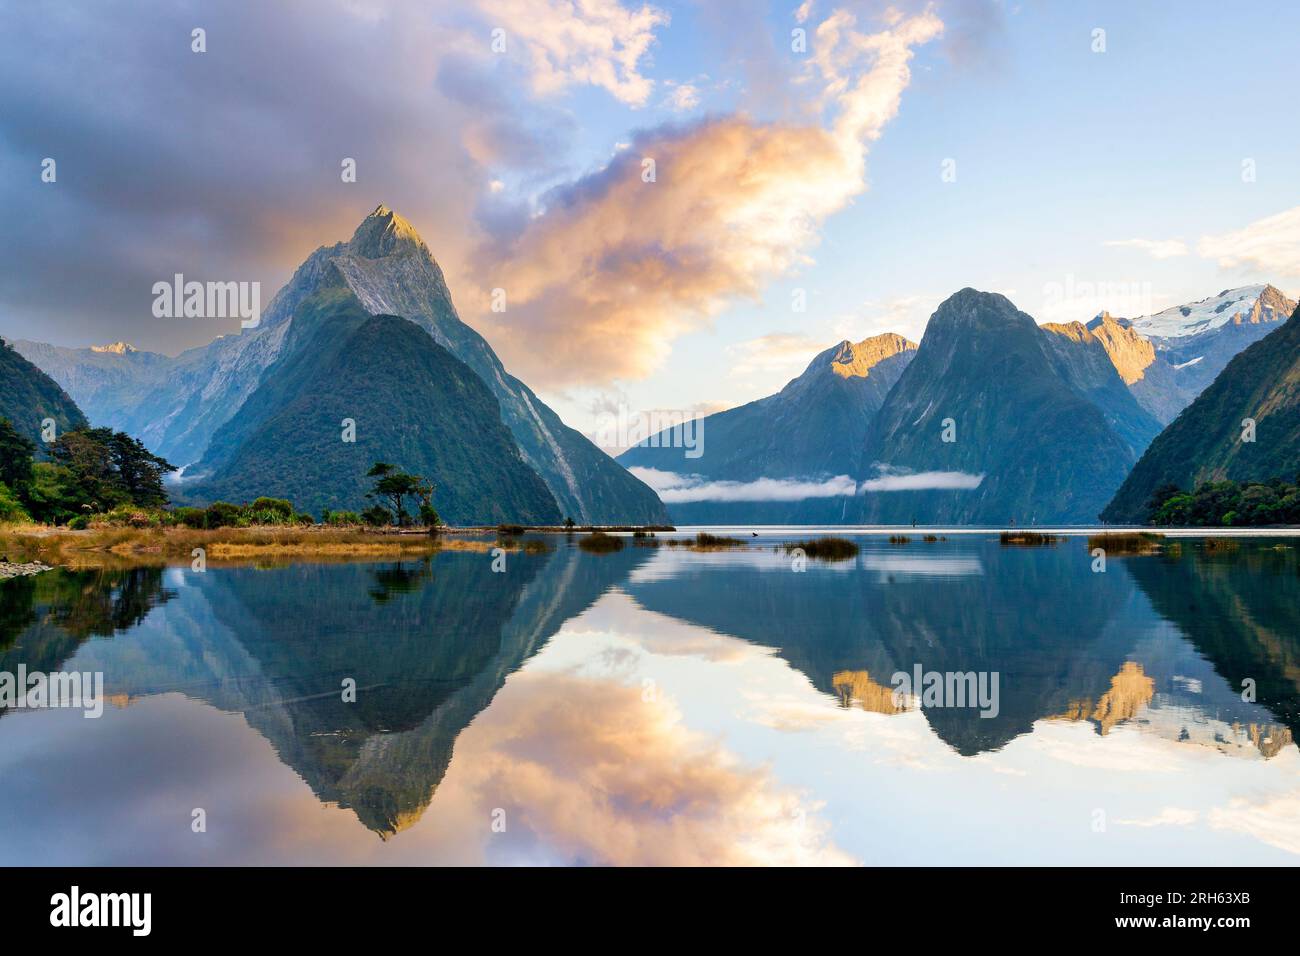 Milford Sound, one of New Zealand's most famous landscapes, at sunrise. Stock Photo